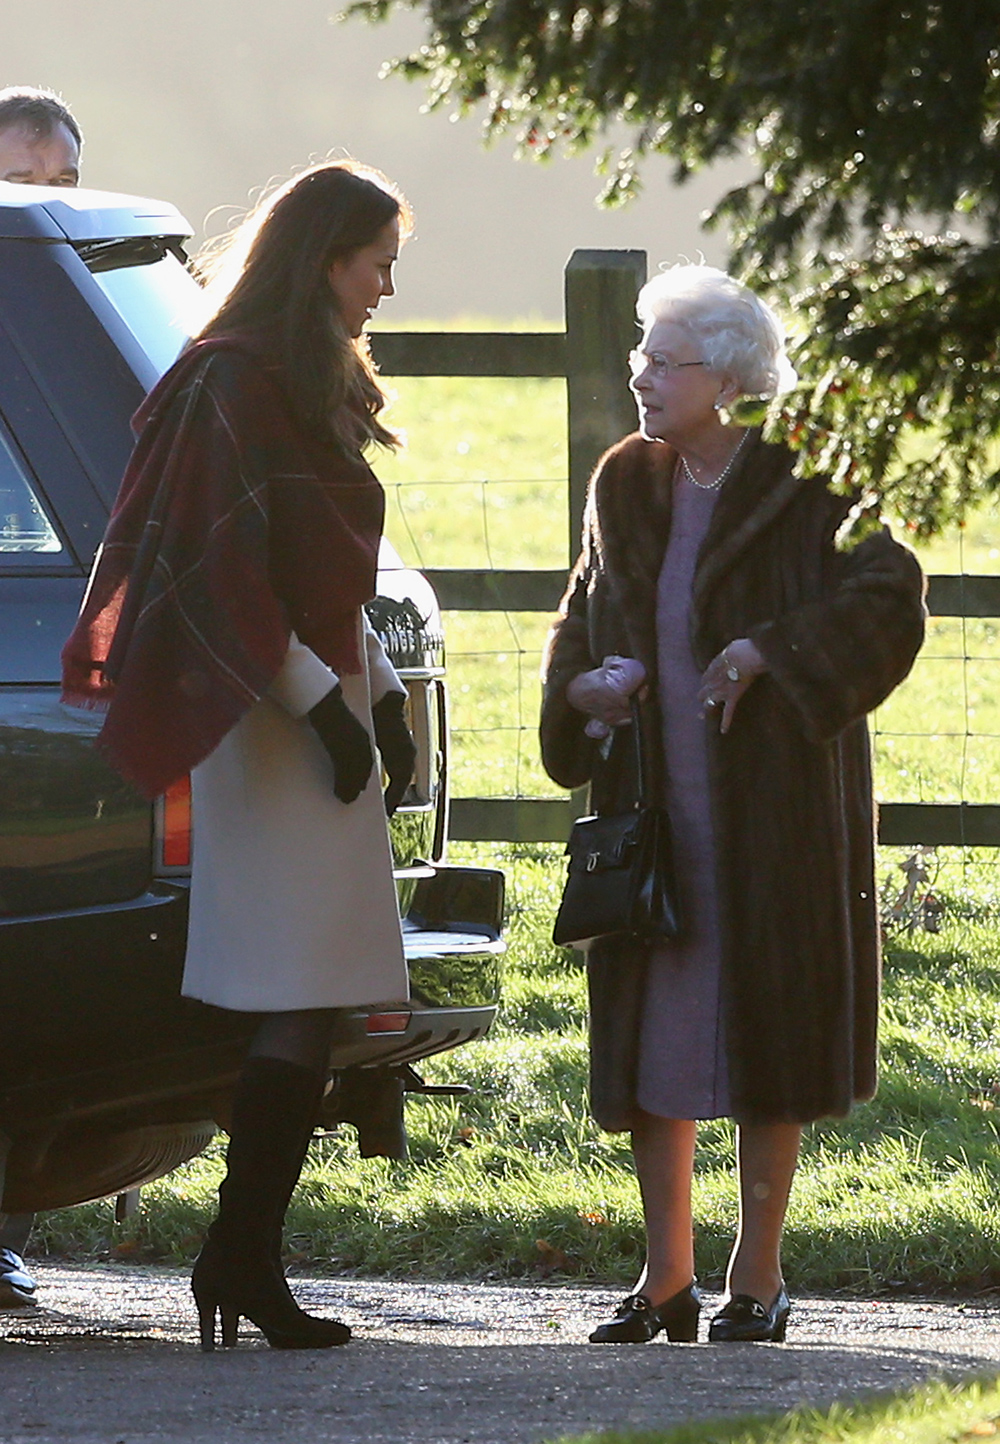 The Queen wears her Christmas Day best to attend a service at Sandringham on December 25, 2013 with the Duchess of Cambridge. Photo / Getty Images